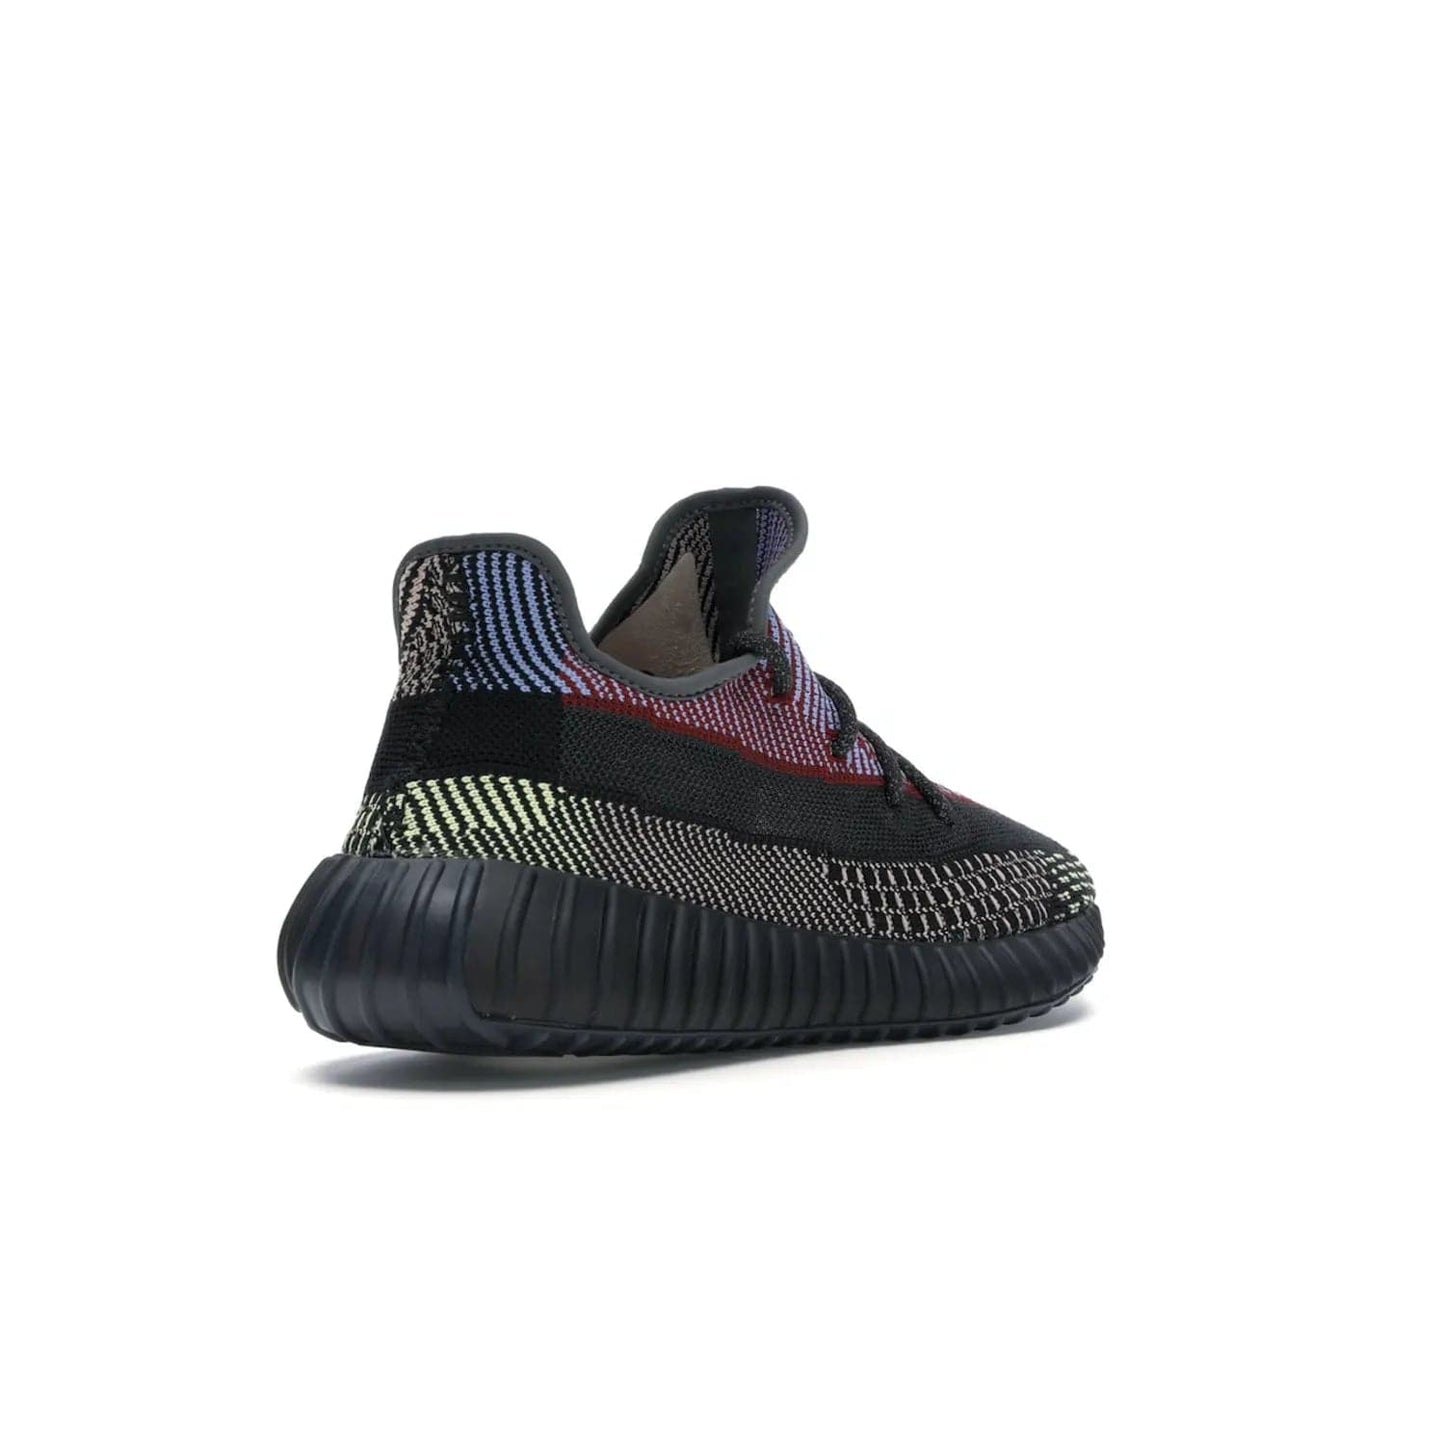 adidas Yeezy Boost 350 V2 Yecheil (Non-Reflective) - Image 32 - Only at www.BallersClubKickz.com - Make a statement with the eye-catching adidas Yeezy Boost 350 V2 Yecheil Non-Reflective. Featuring a spectrum of colorful hues, black upper, Boost cushioning, and black side stripe, the sneaker brings a luxe yet playful finish to any outfit.